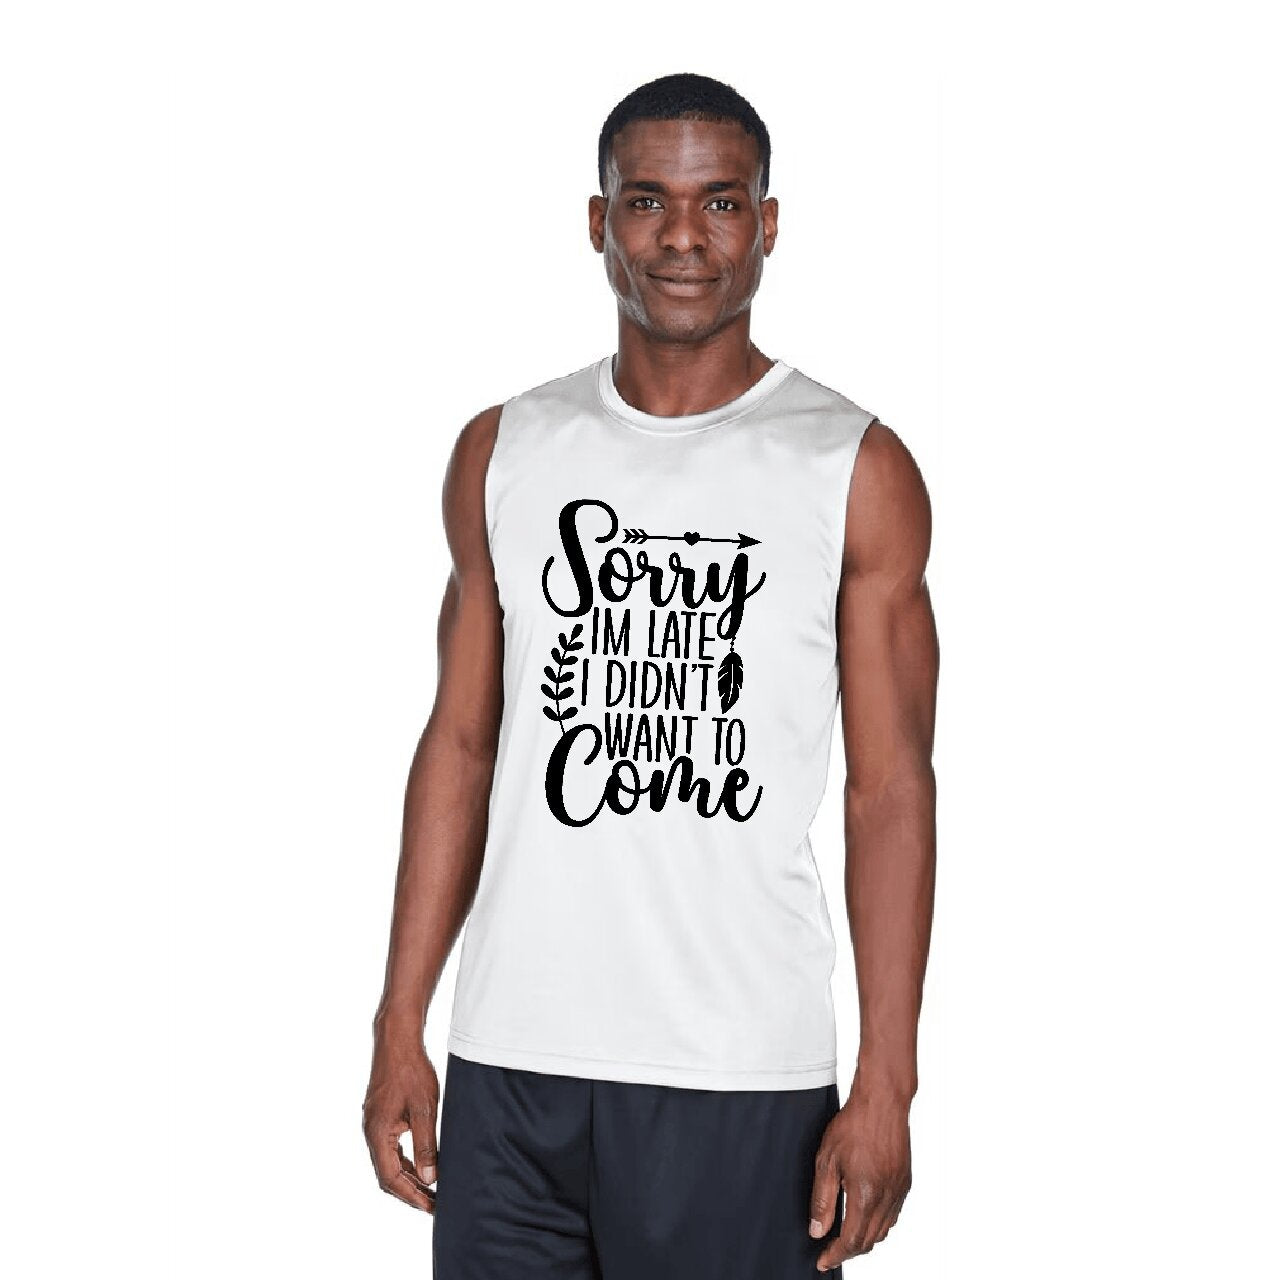 Sorry I'm Late, I Didn't Want To Come - Tank Top